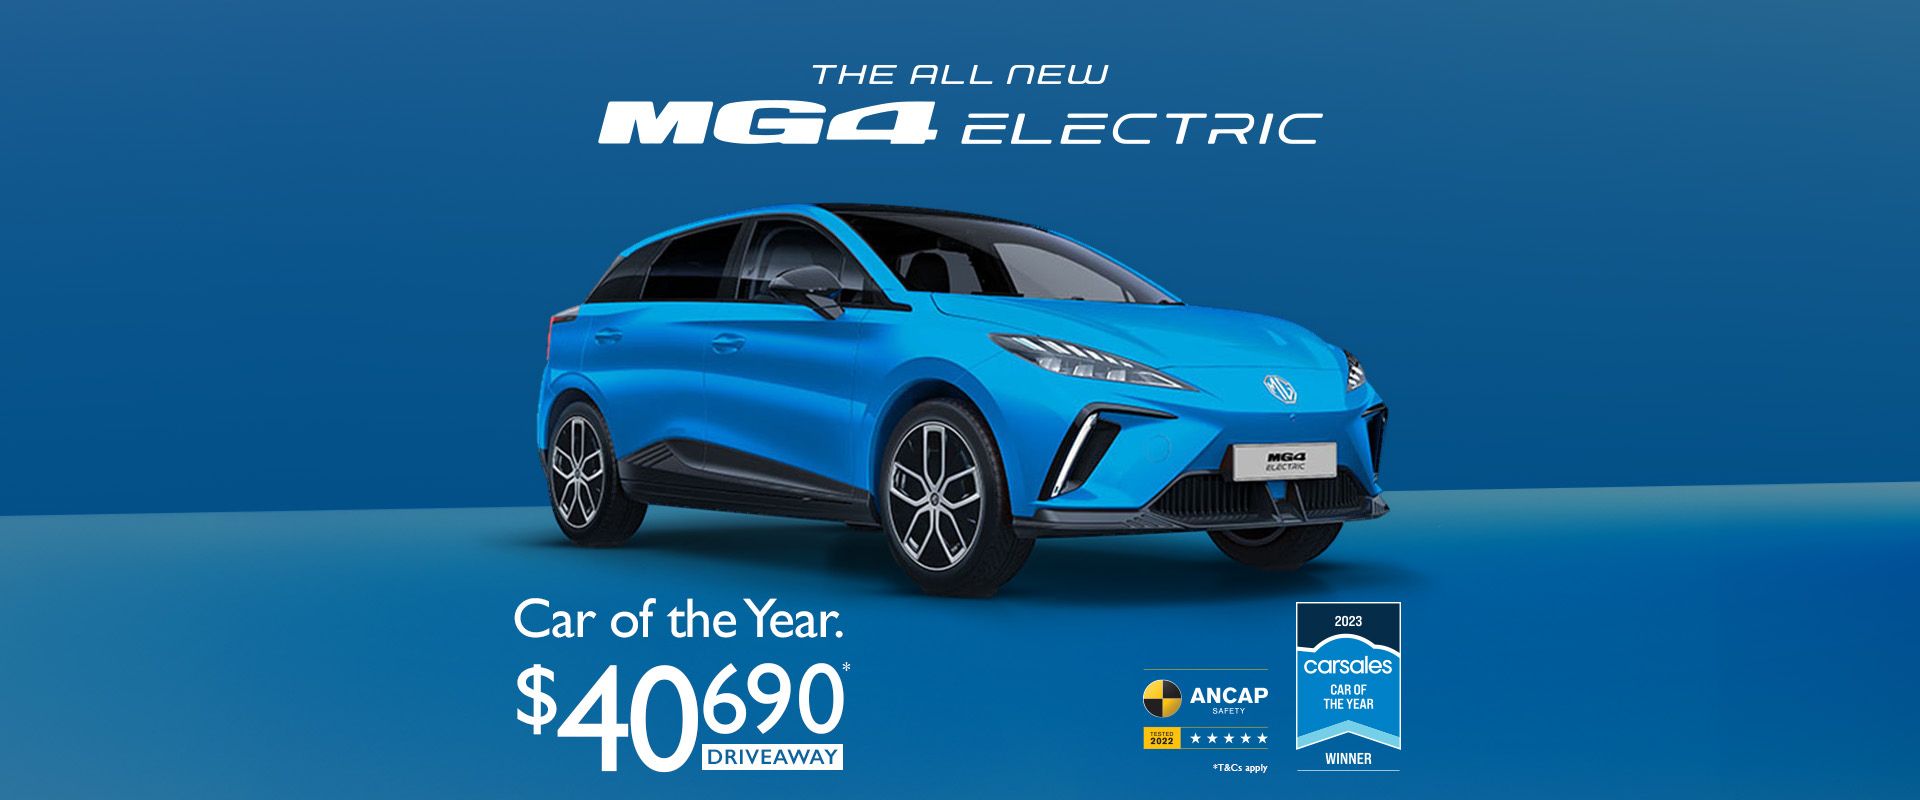 ALL NEW MG4 ELECTRIC | Carsales - 2023 Car of the Year Winner